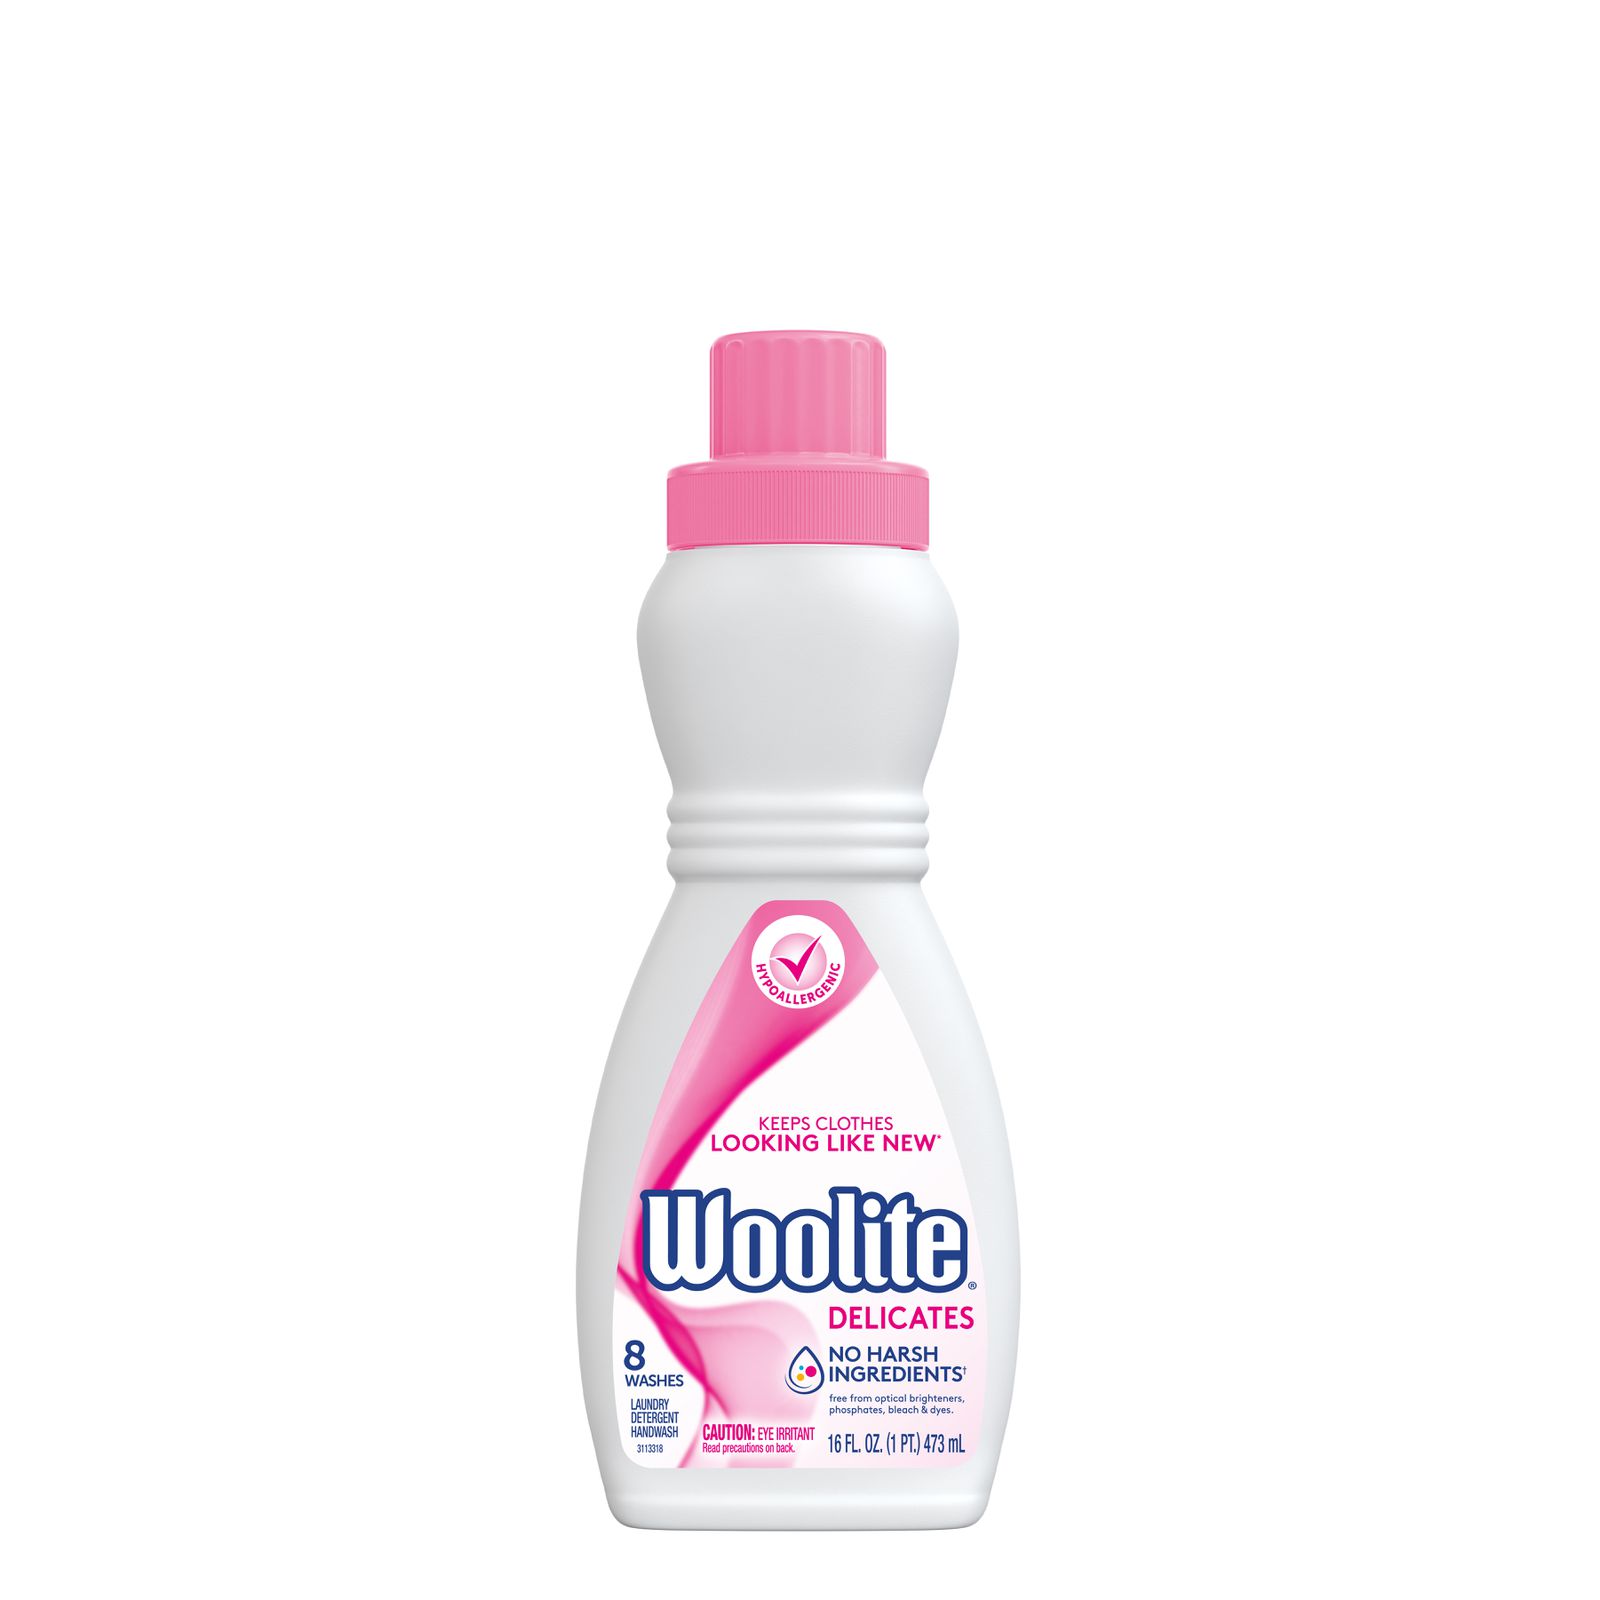 Woolite Darks Laundry Detergent reviews in Laundry Care